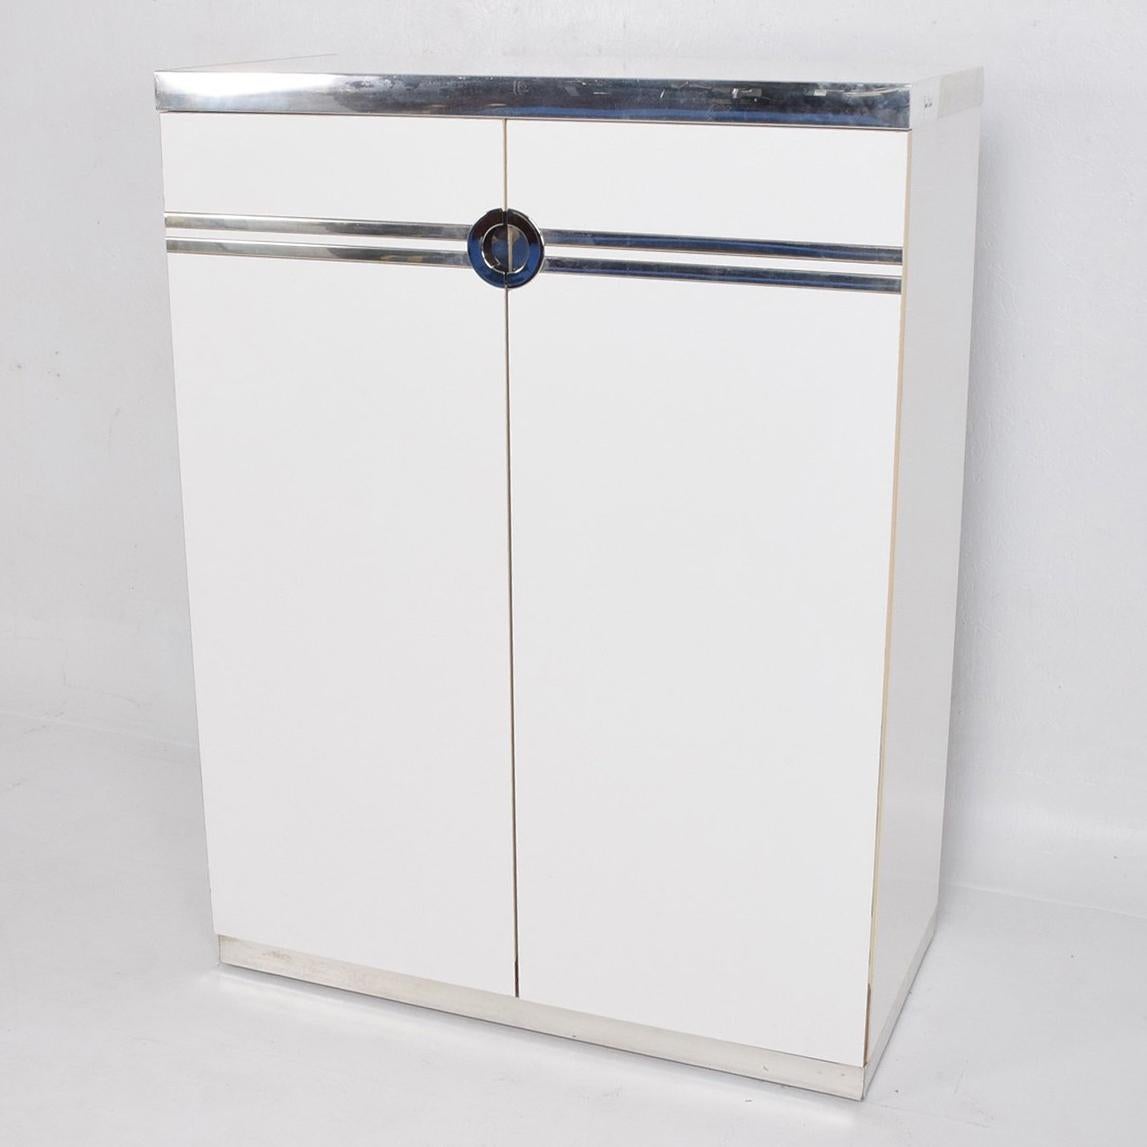 For your consideration a vintage Pierre Cardin highboy or chest of drawers made in formica, wood, aluminium and chrome-plated accents. 

I have a bedroom set available in another posting. 

All drawers open and close with ease. Signed Pierre